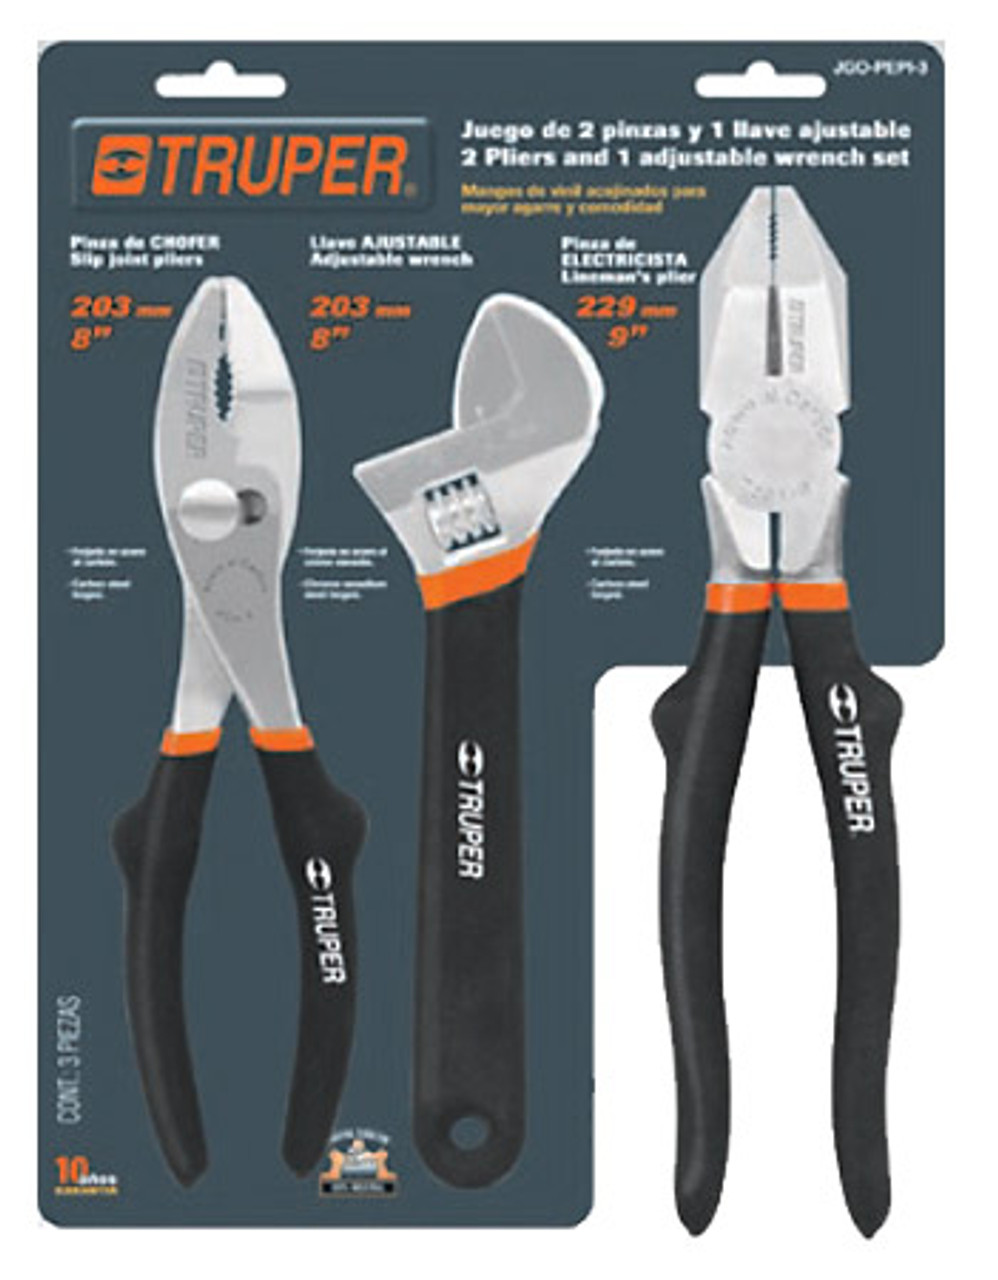 Truper Plier And Adjustable Wrench Set 3 pieces #18216